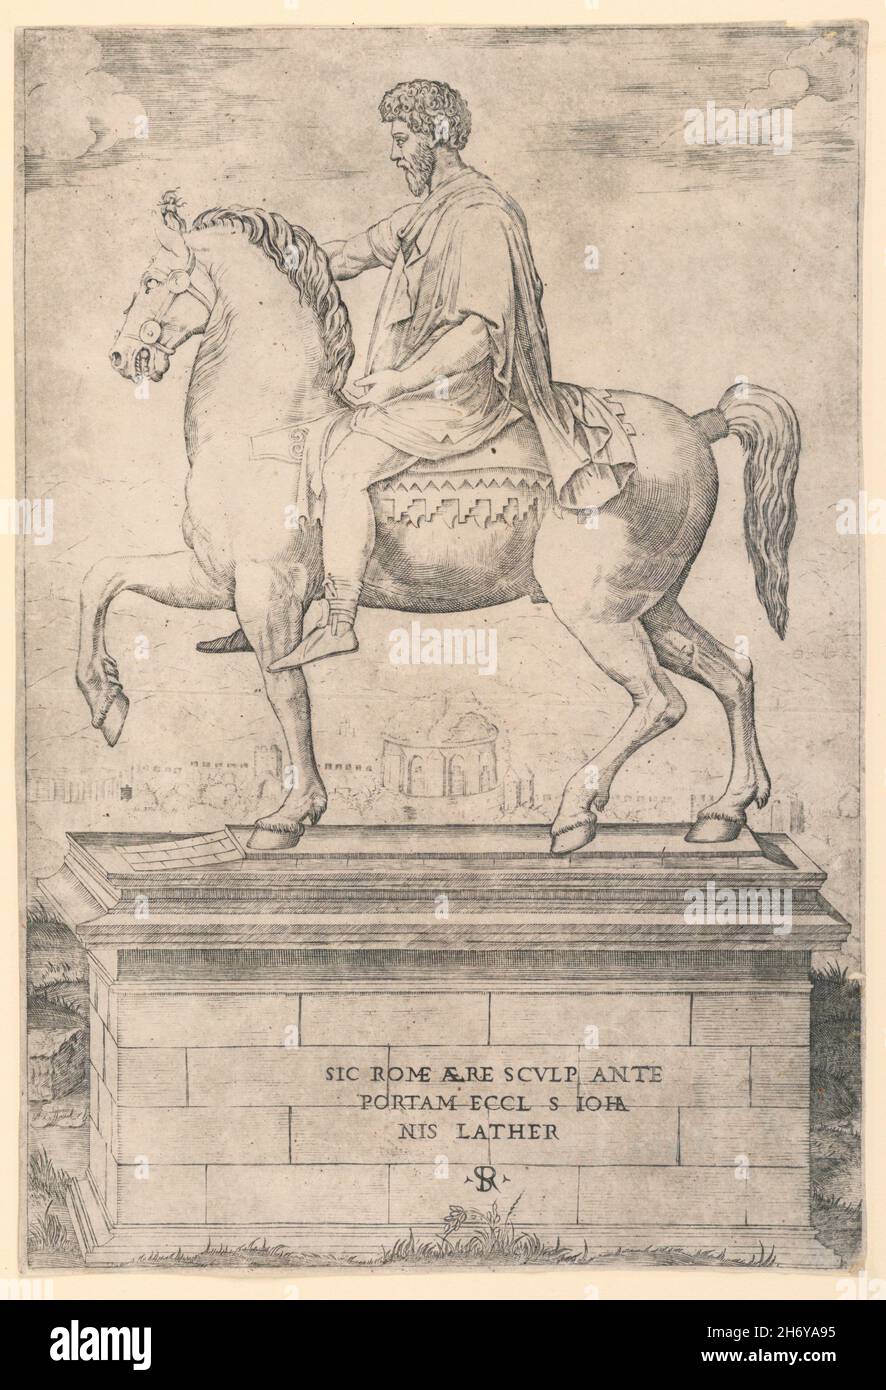 Equestrian statue of Roman emperor and stoic philosopher Marcus Aurelius in side view on a pedestal, print by Marco Dente, Italian, ca. 1525 Stock Photo